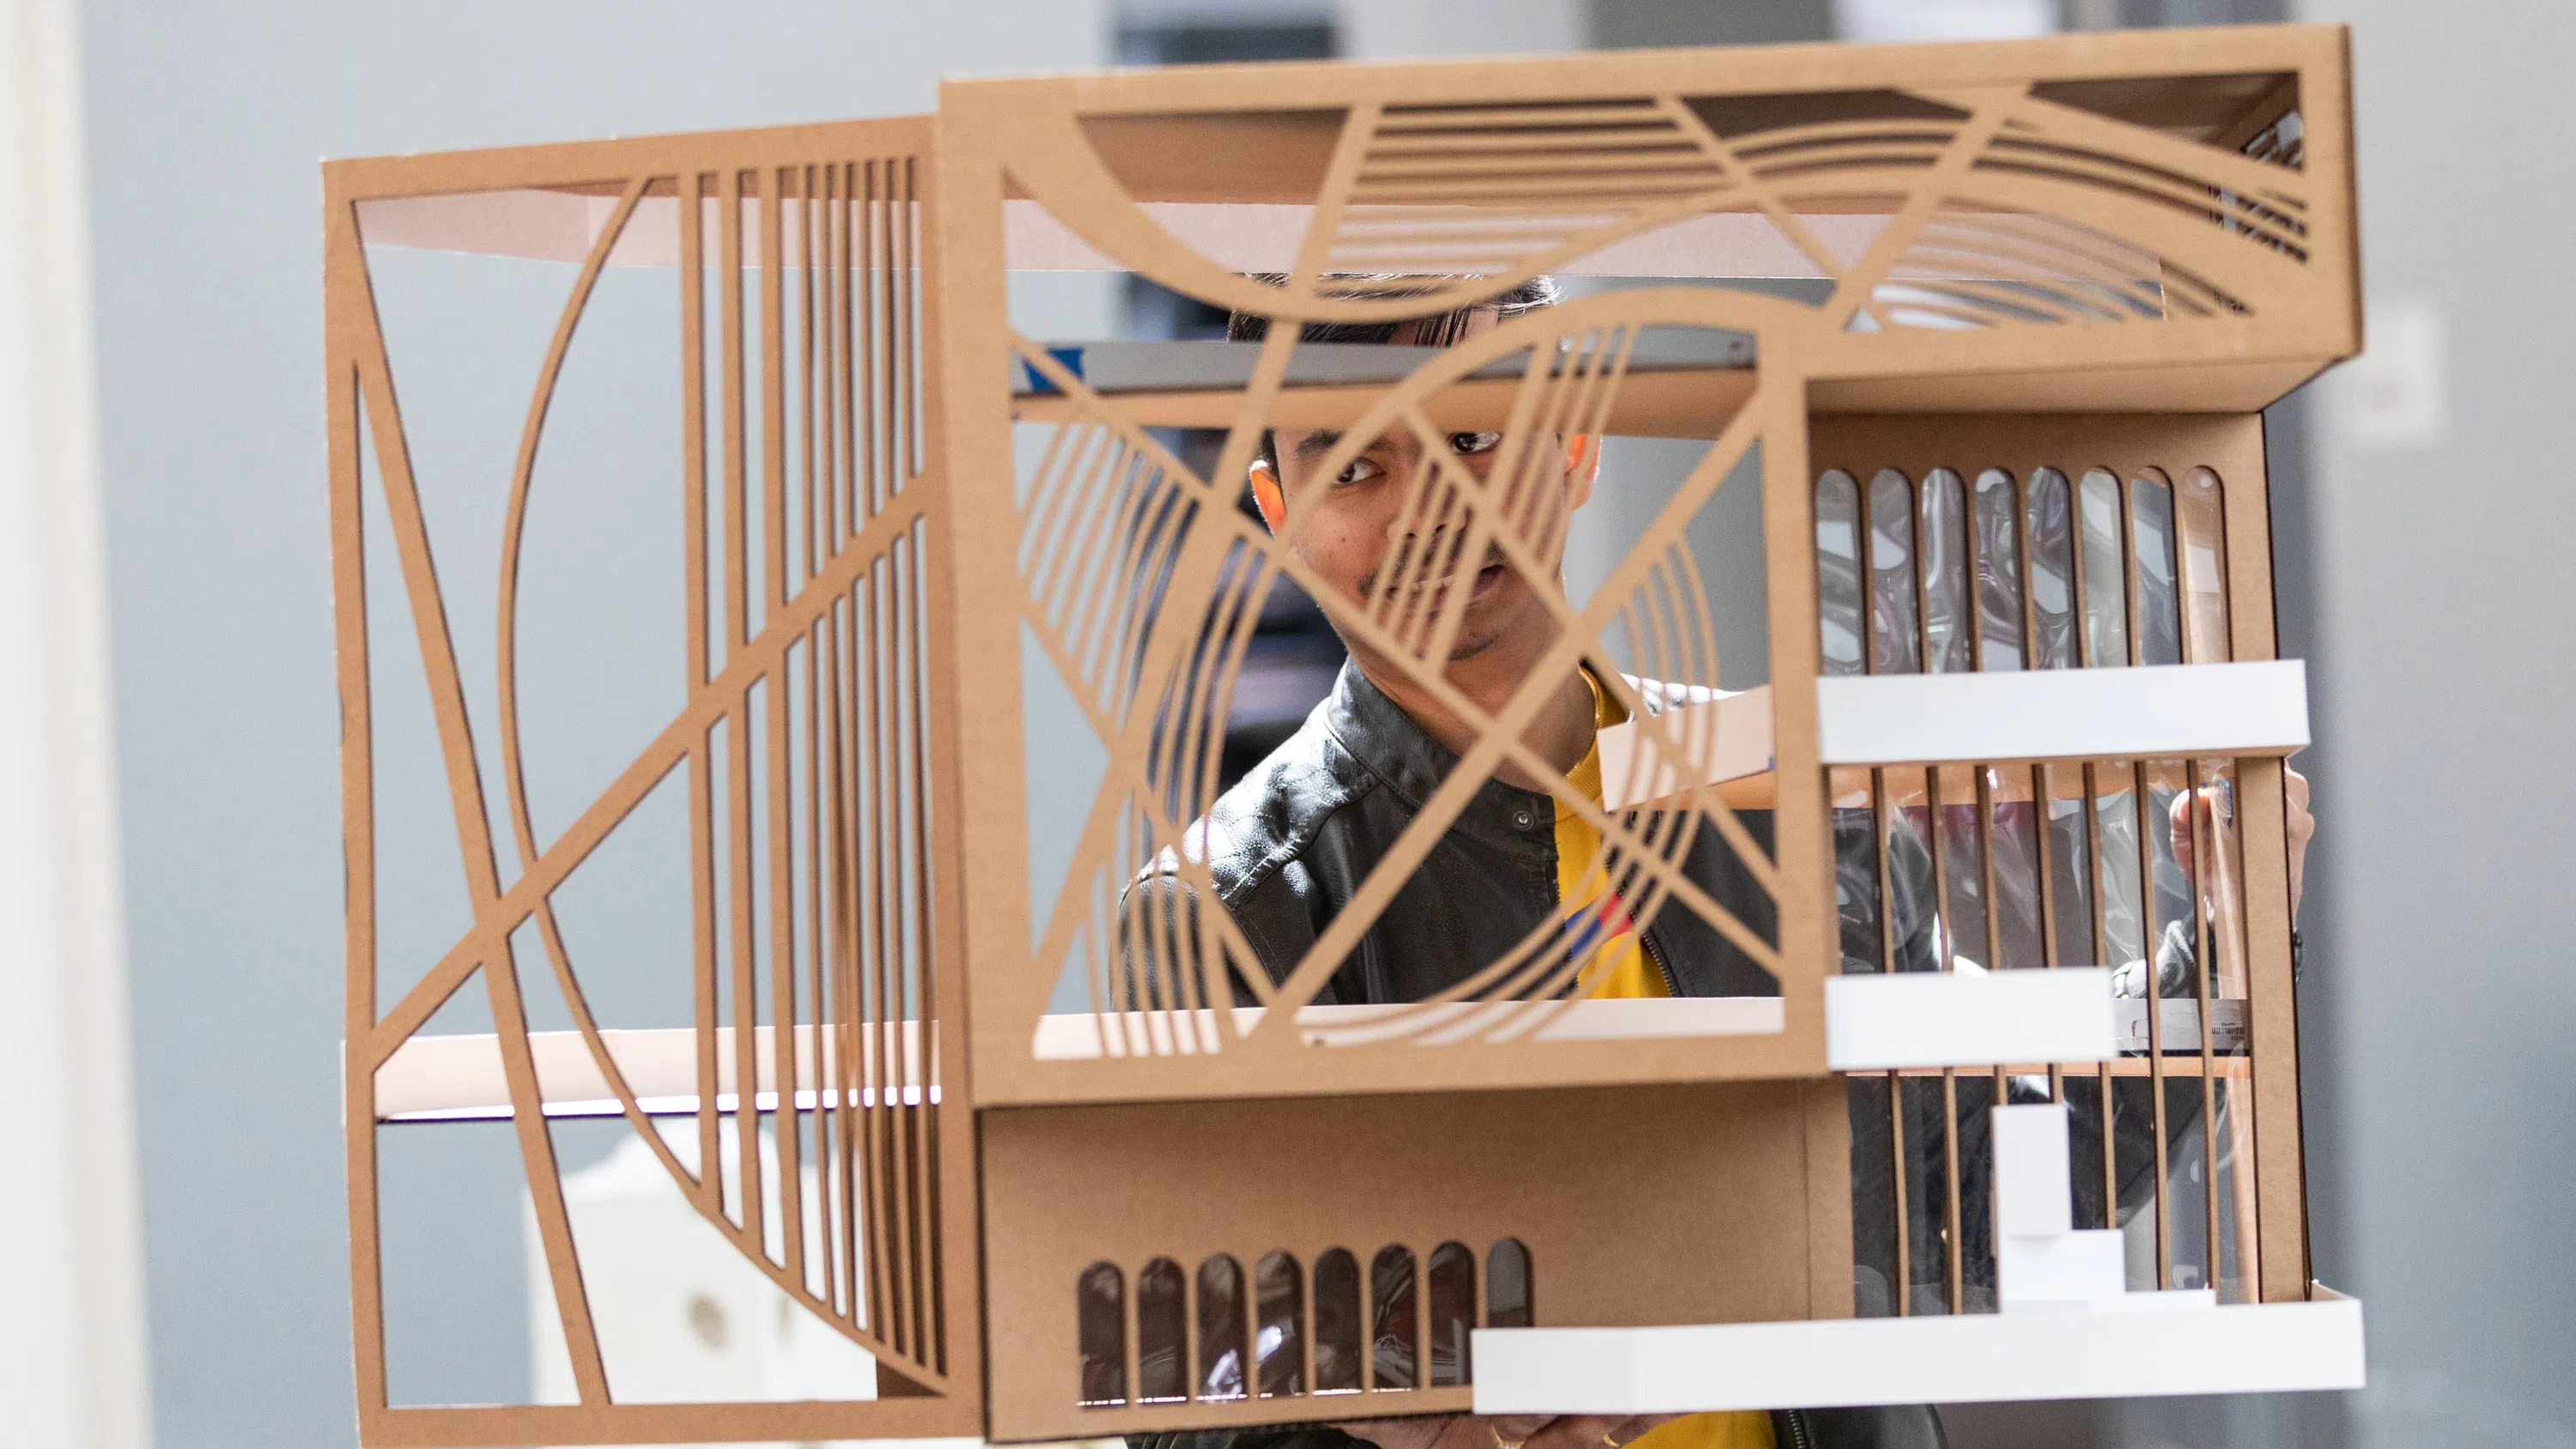 A student holds an architectural model close to his face.